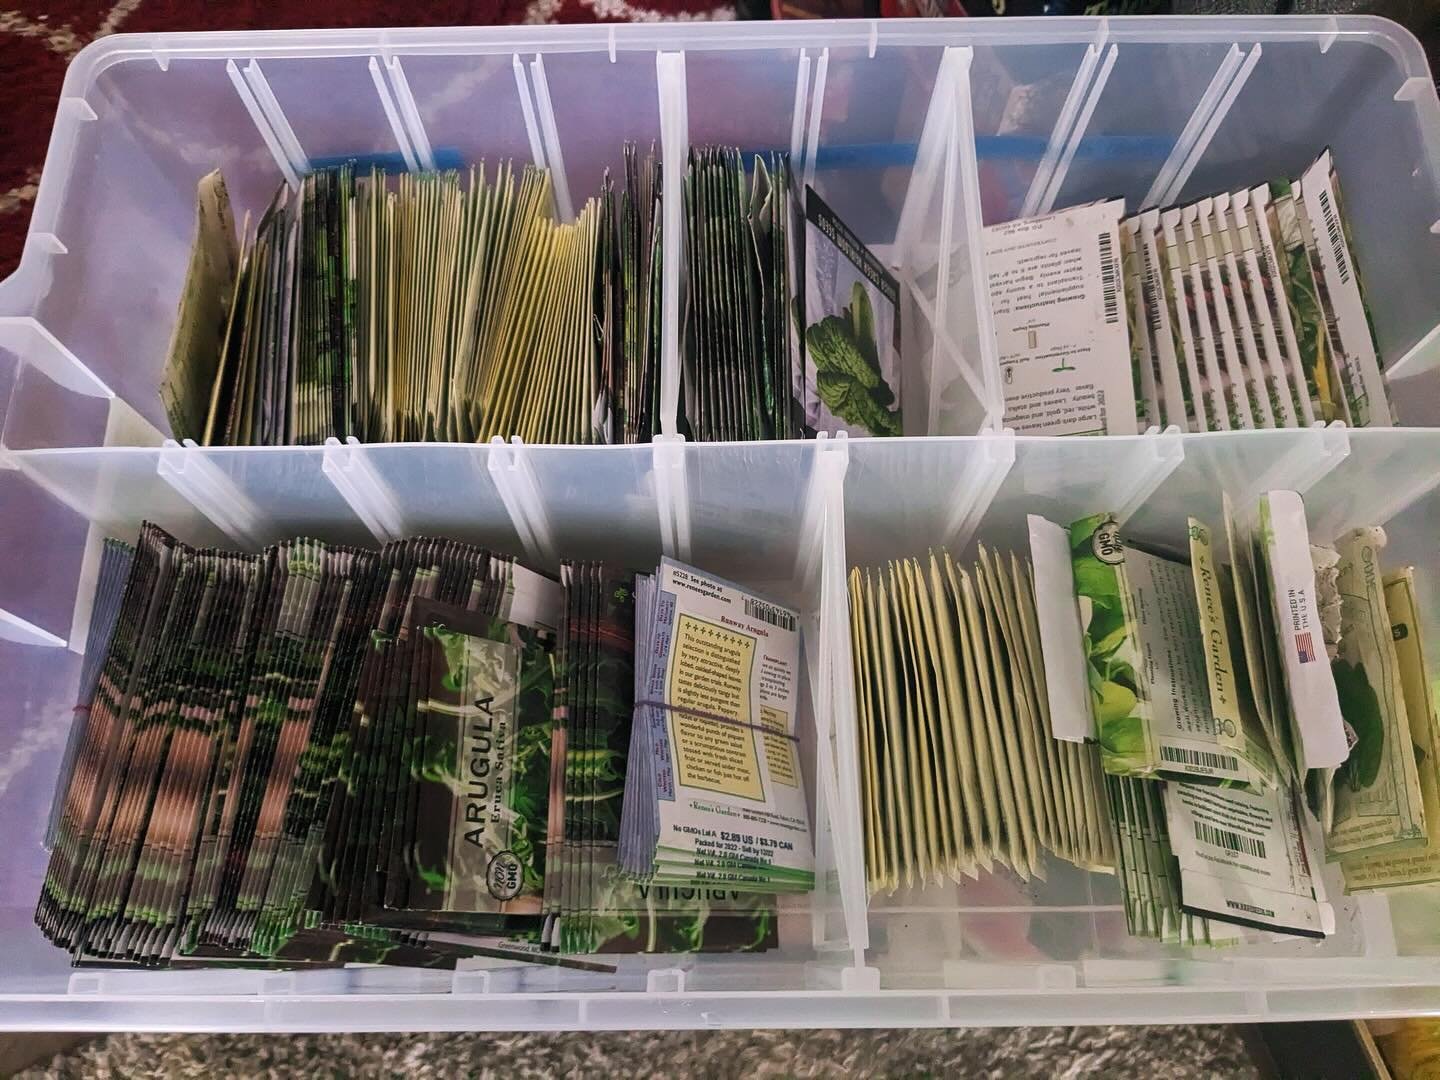 🌱 Have a Need for Seeds? We have a ton of free seeds we got last year and can&rsquo;t use them all any time soon. If you or an organization you know of could use free vegetable seeds, please email nora@ecfarm.org to coordinate pickup.